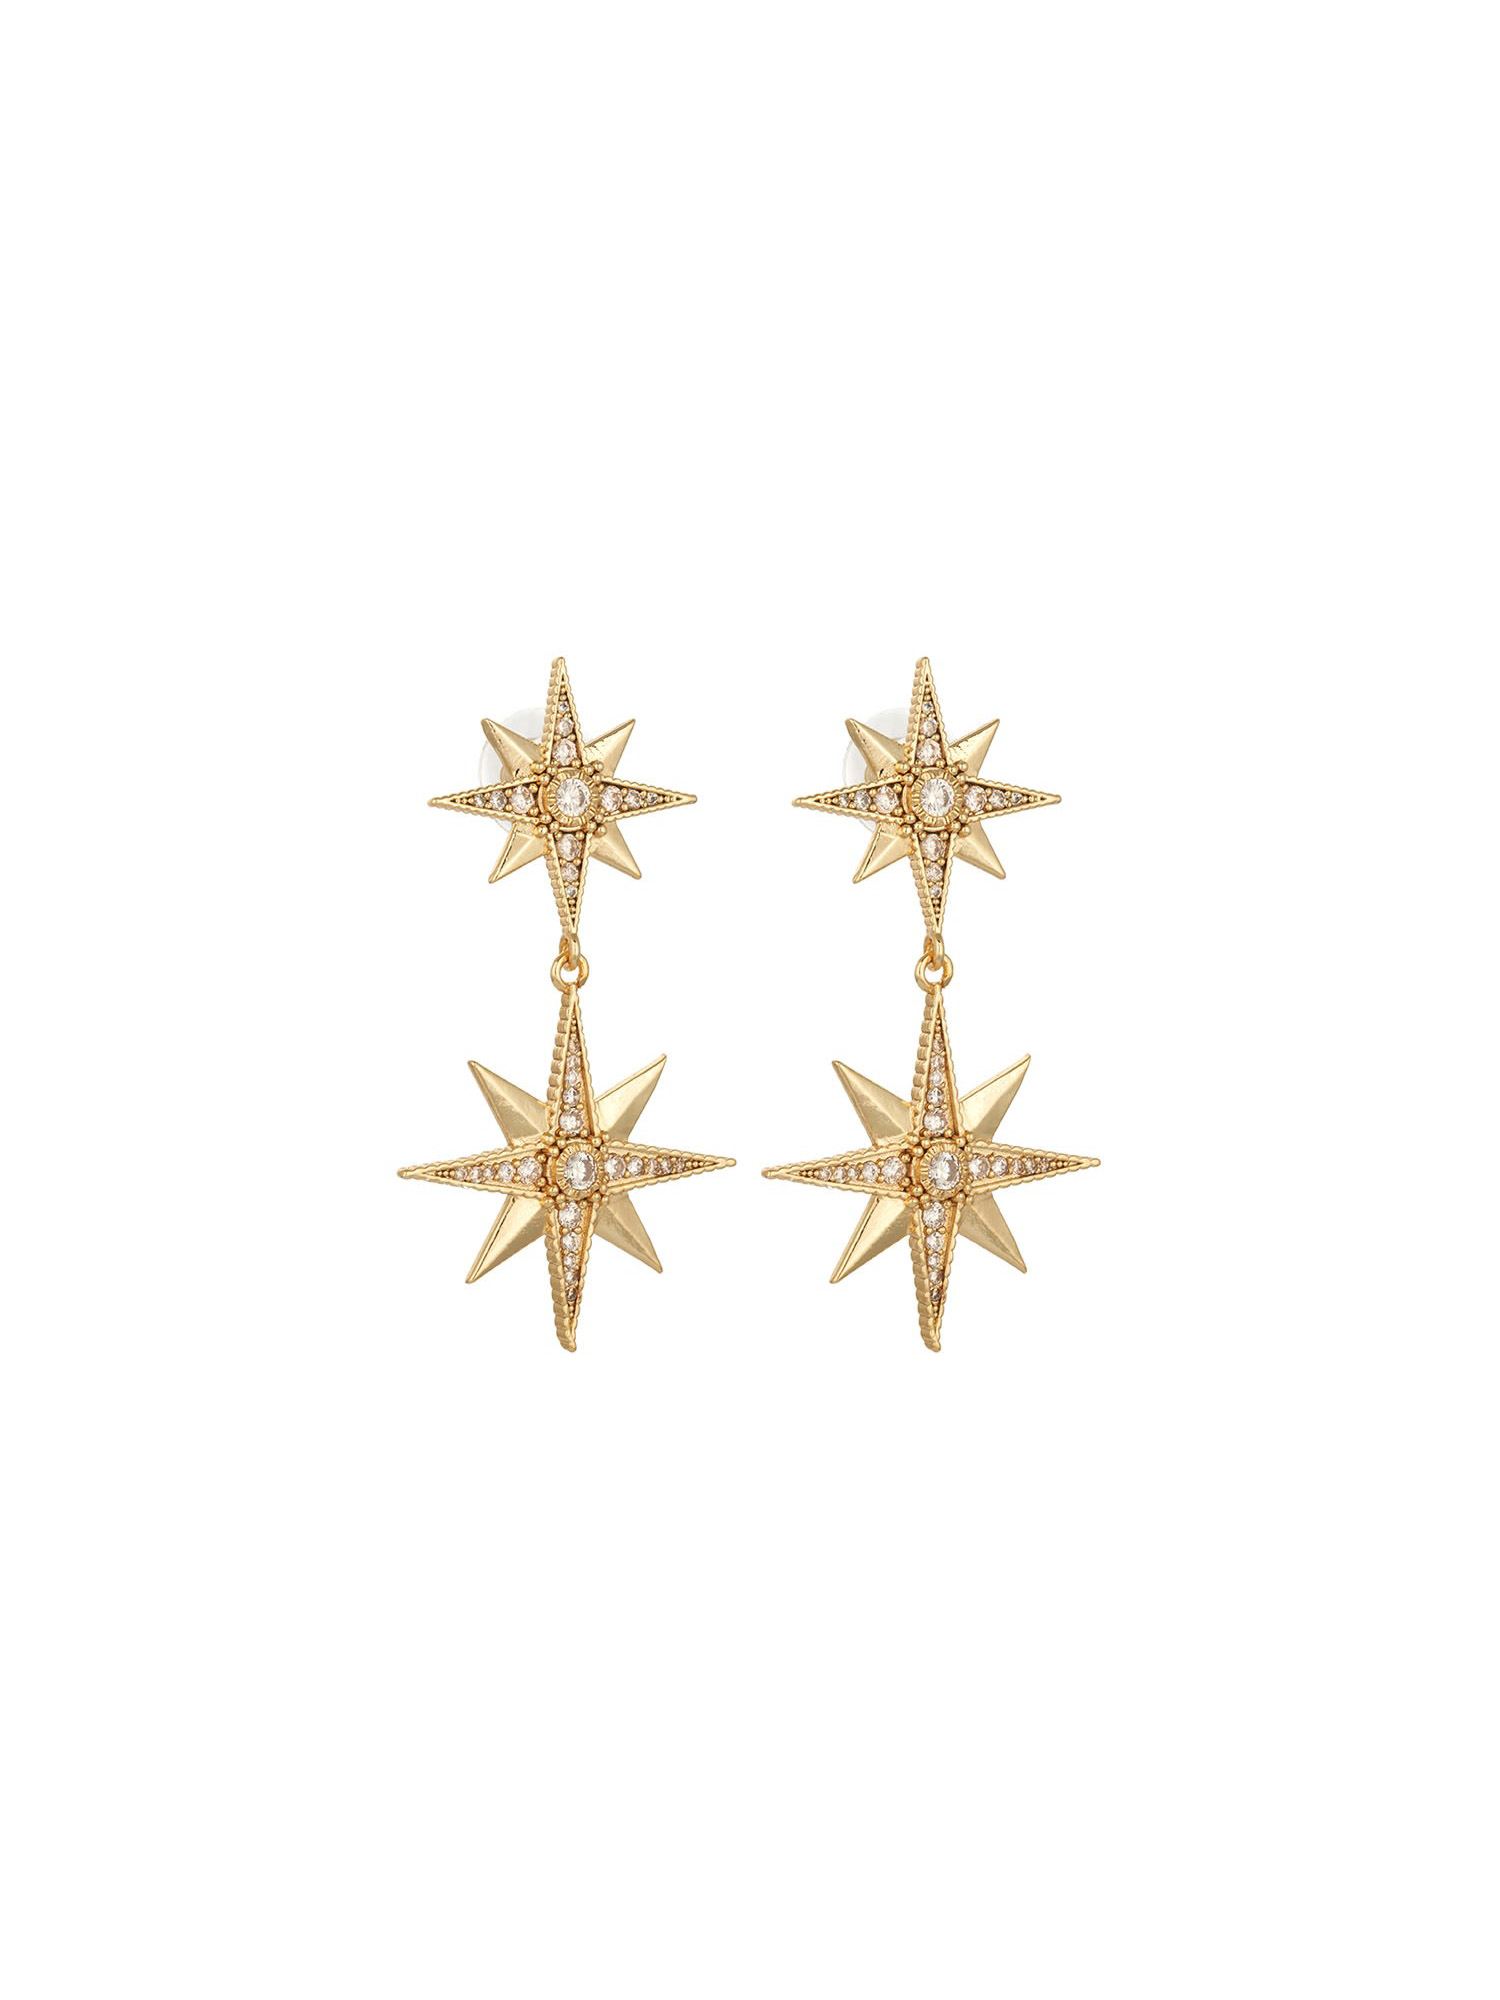 THE NORTH STAR EARRINGS GOLD